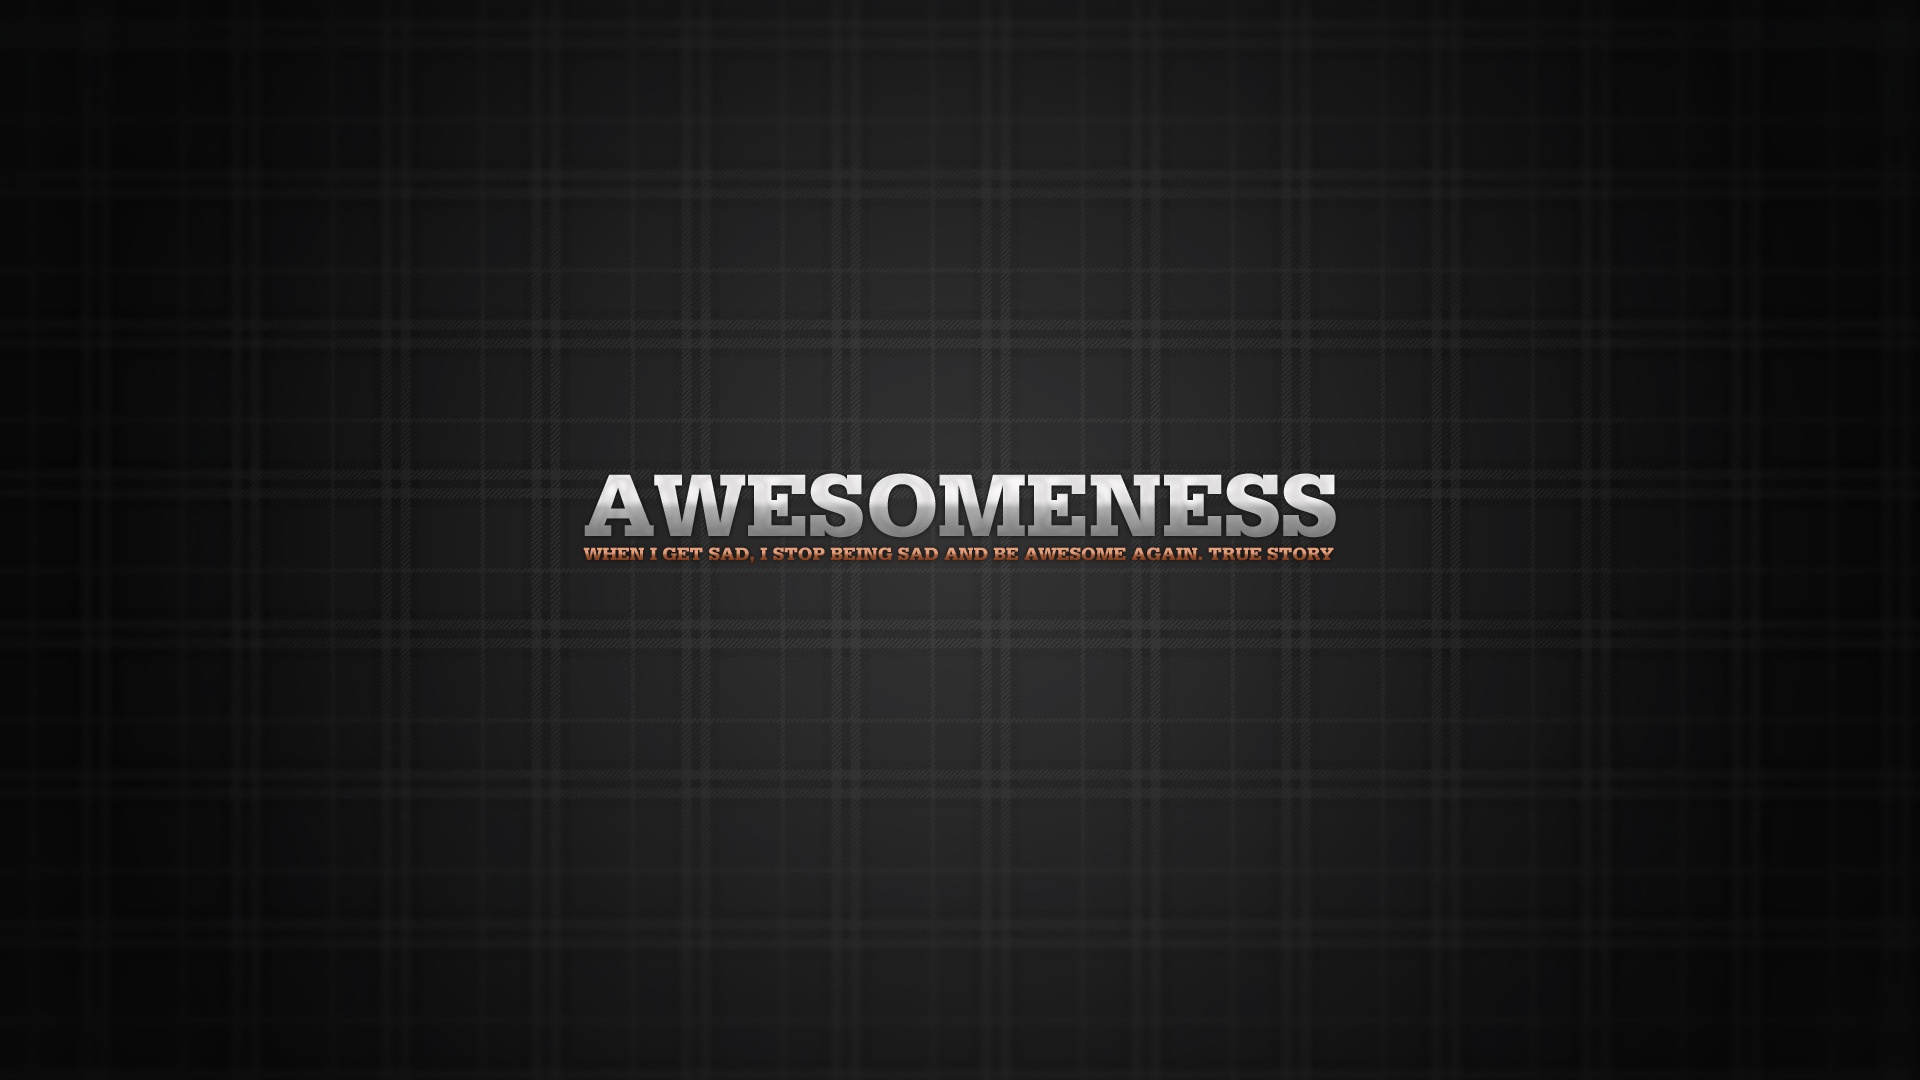 Awesomeness Full HD 1080p Wallpaper Funny Quote True Story